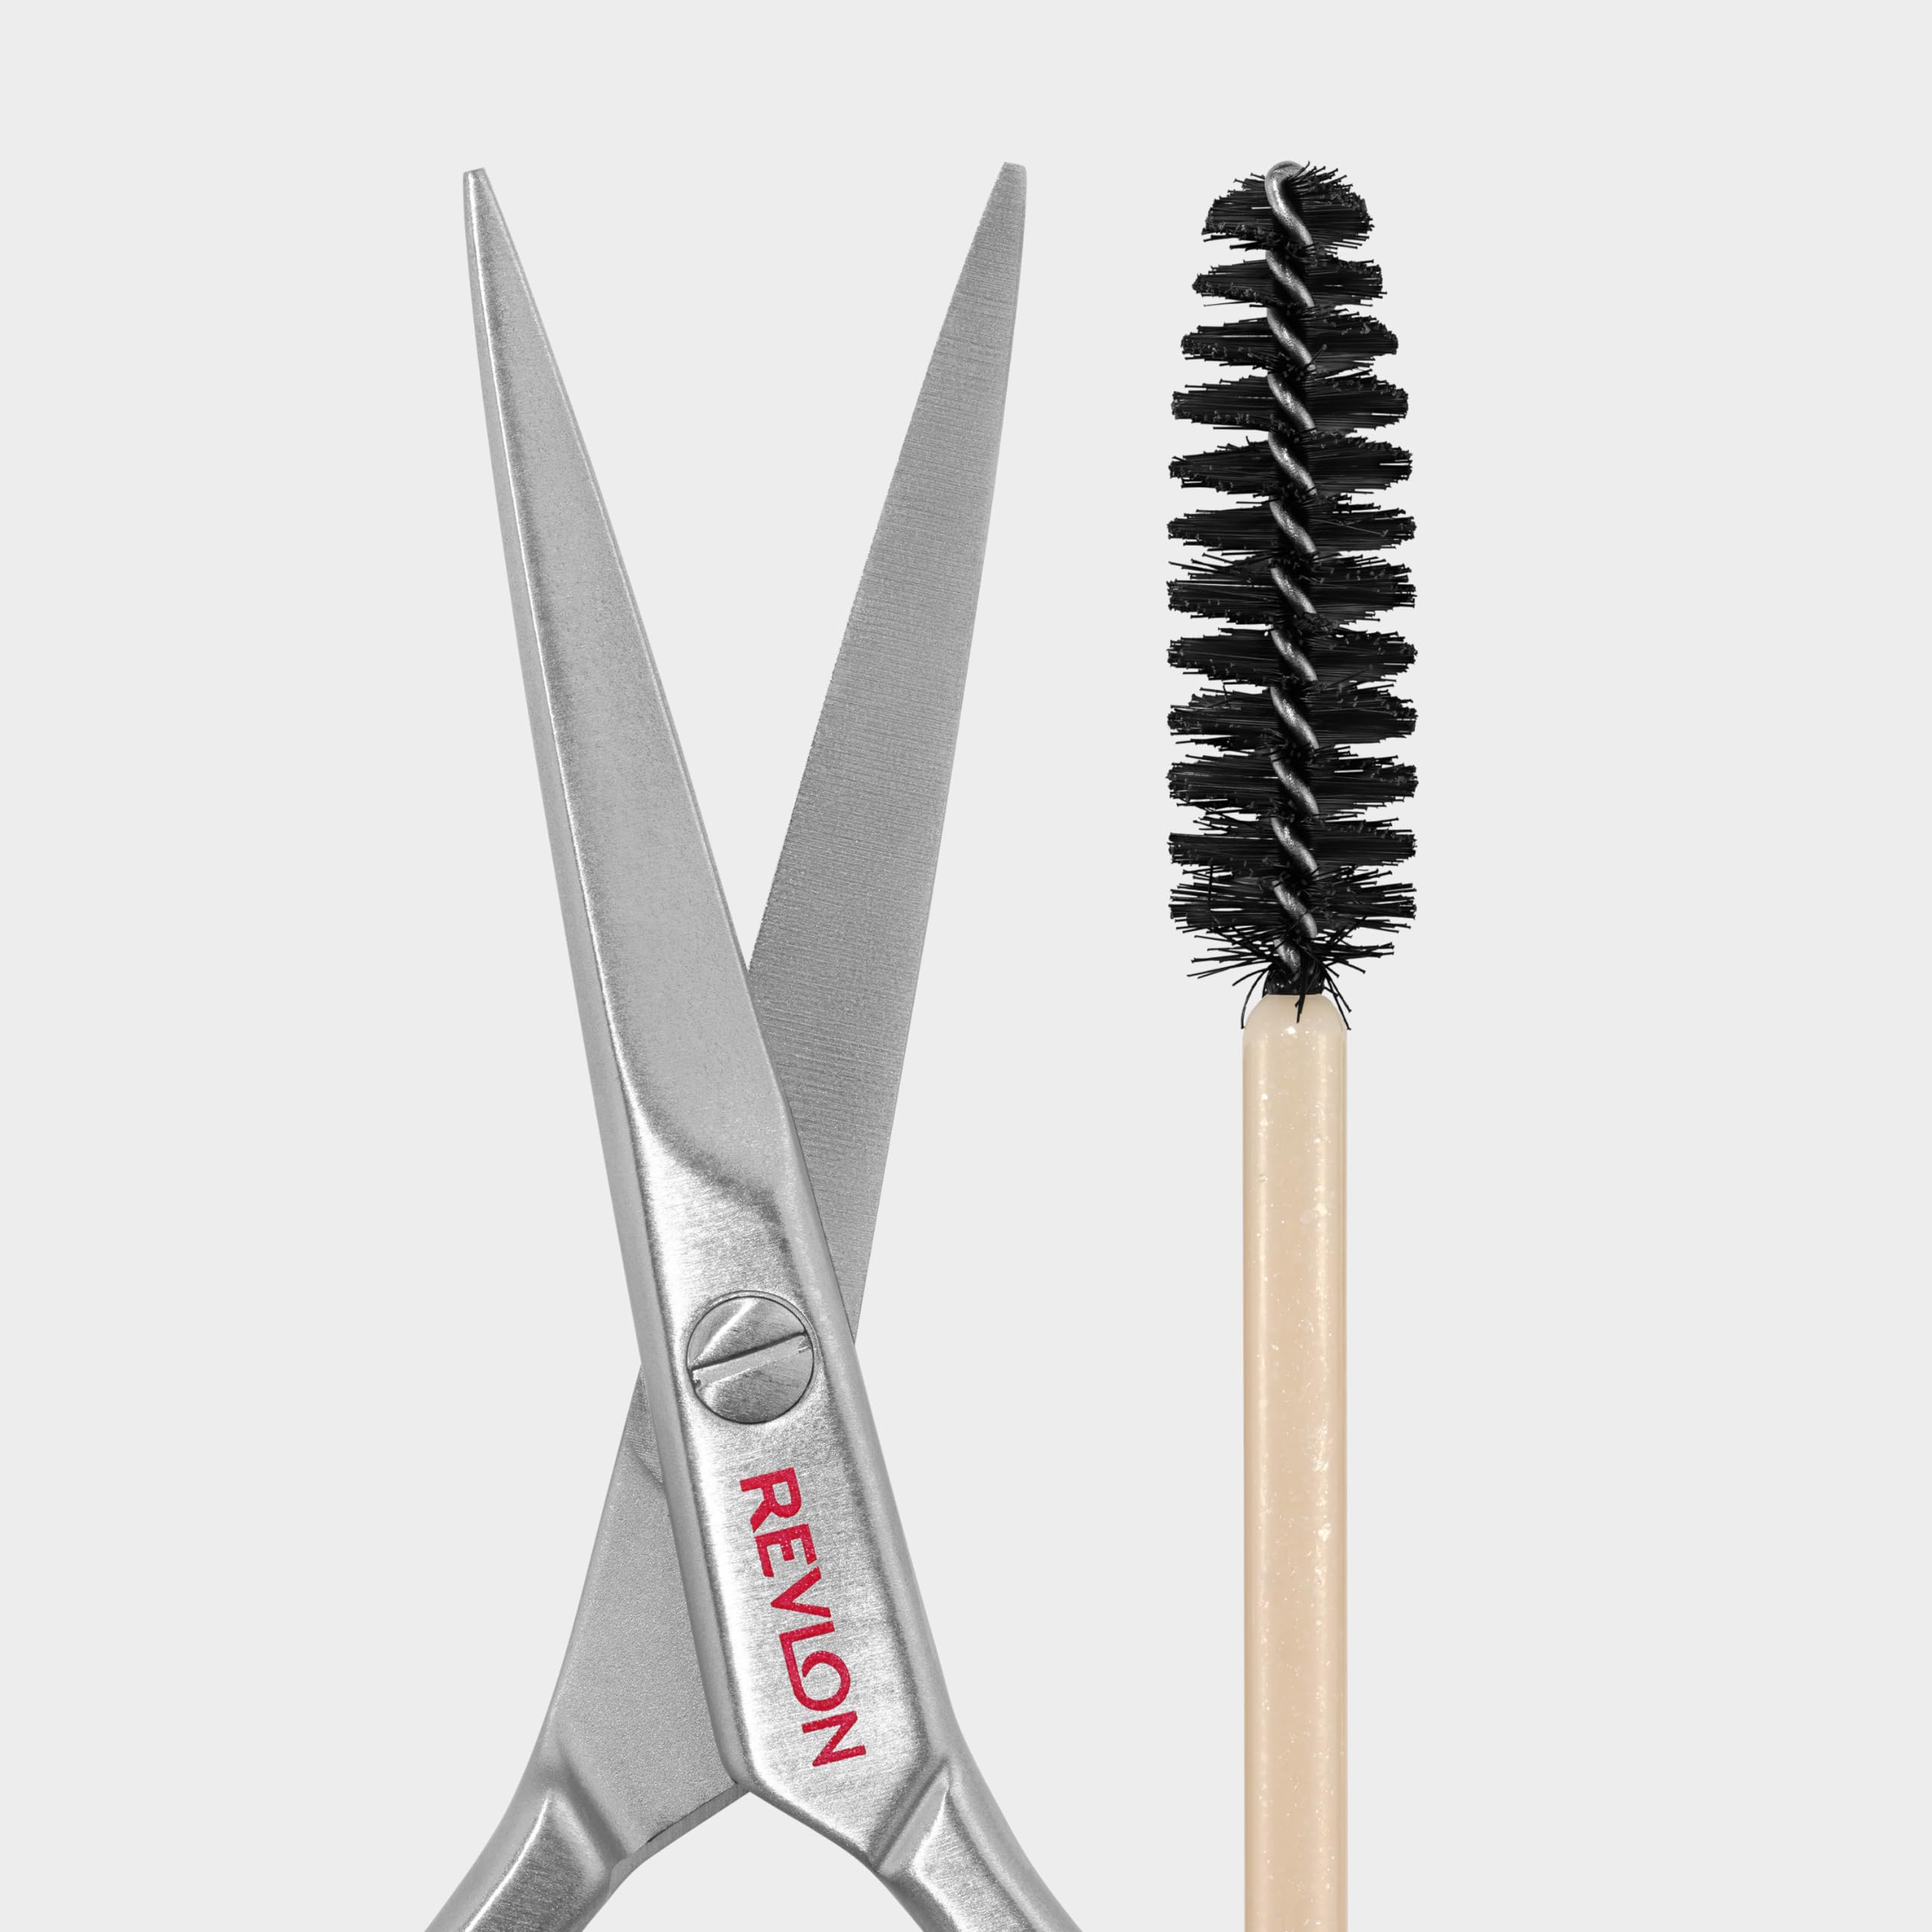 Revlon Designer Series Brow Set, Trimming and Shaping Eyebrow Kit with Brow Scissor and Spoolie Brush, Easy to Use at Home or on The Go, 1 Count